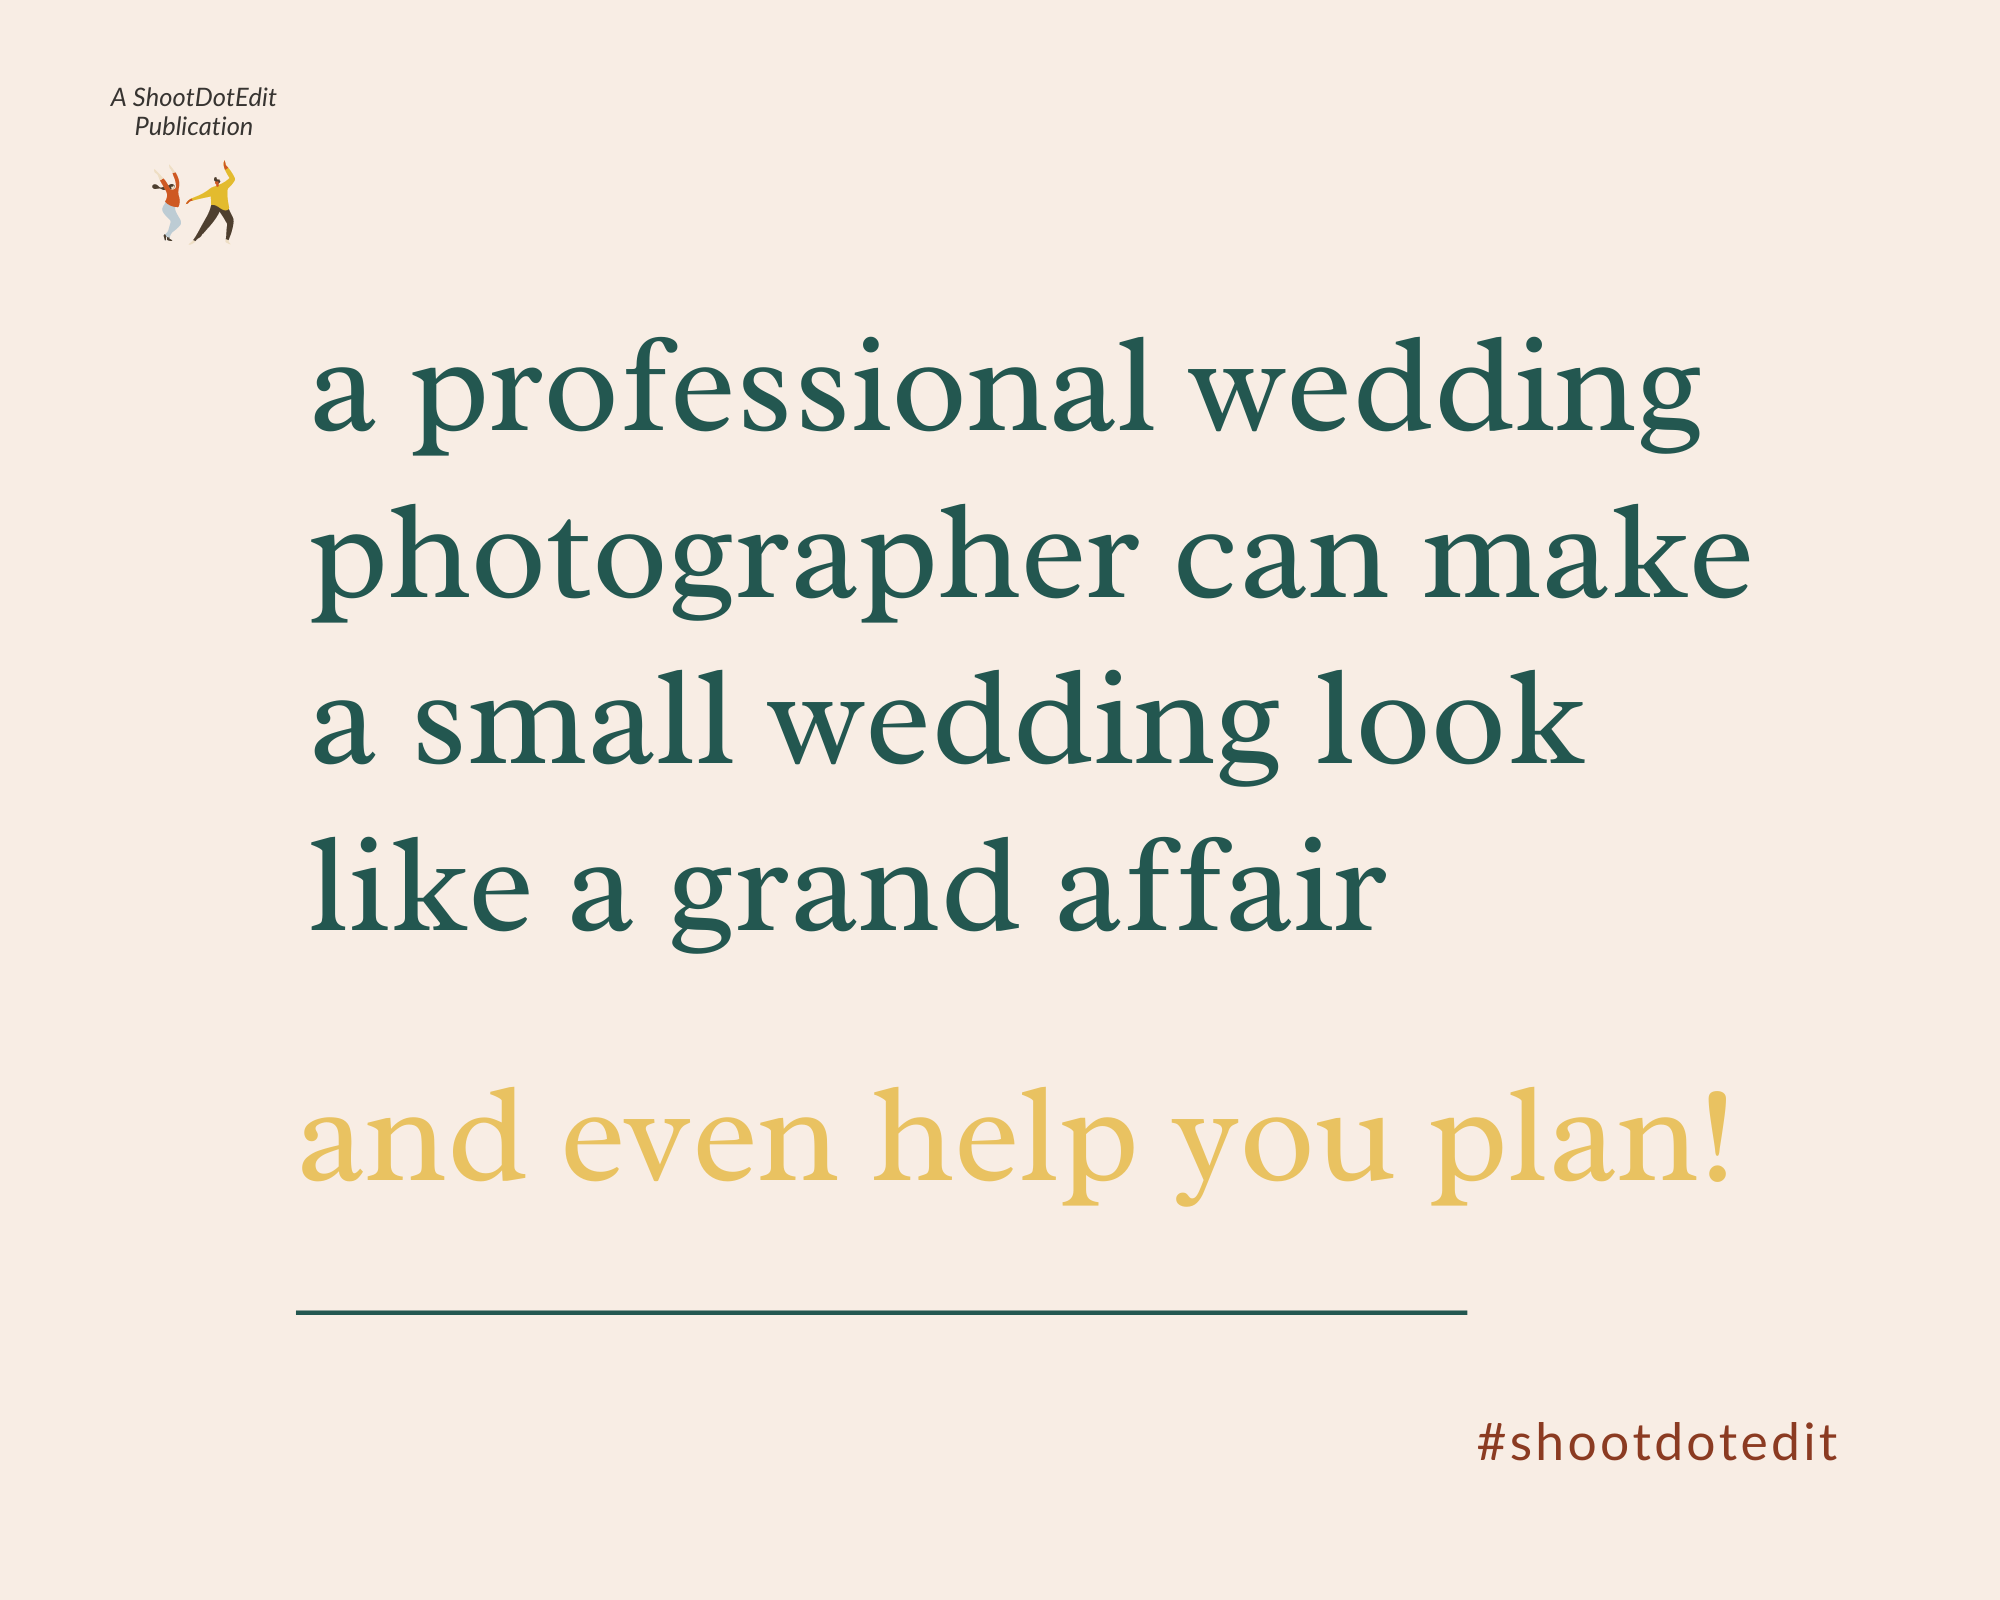 Infographic stating - a professional wedding photographer can make a small wedding look like a grand affair 